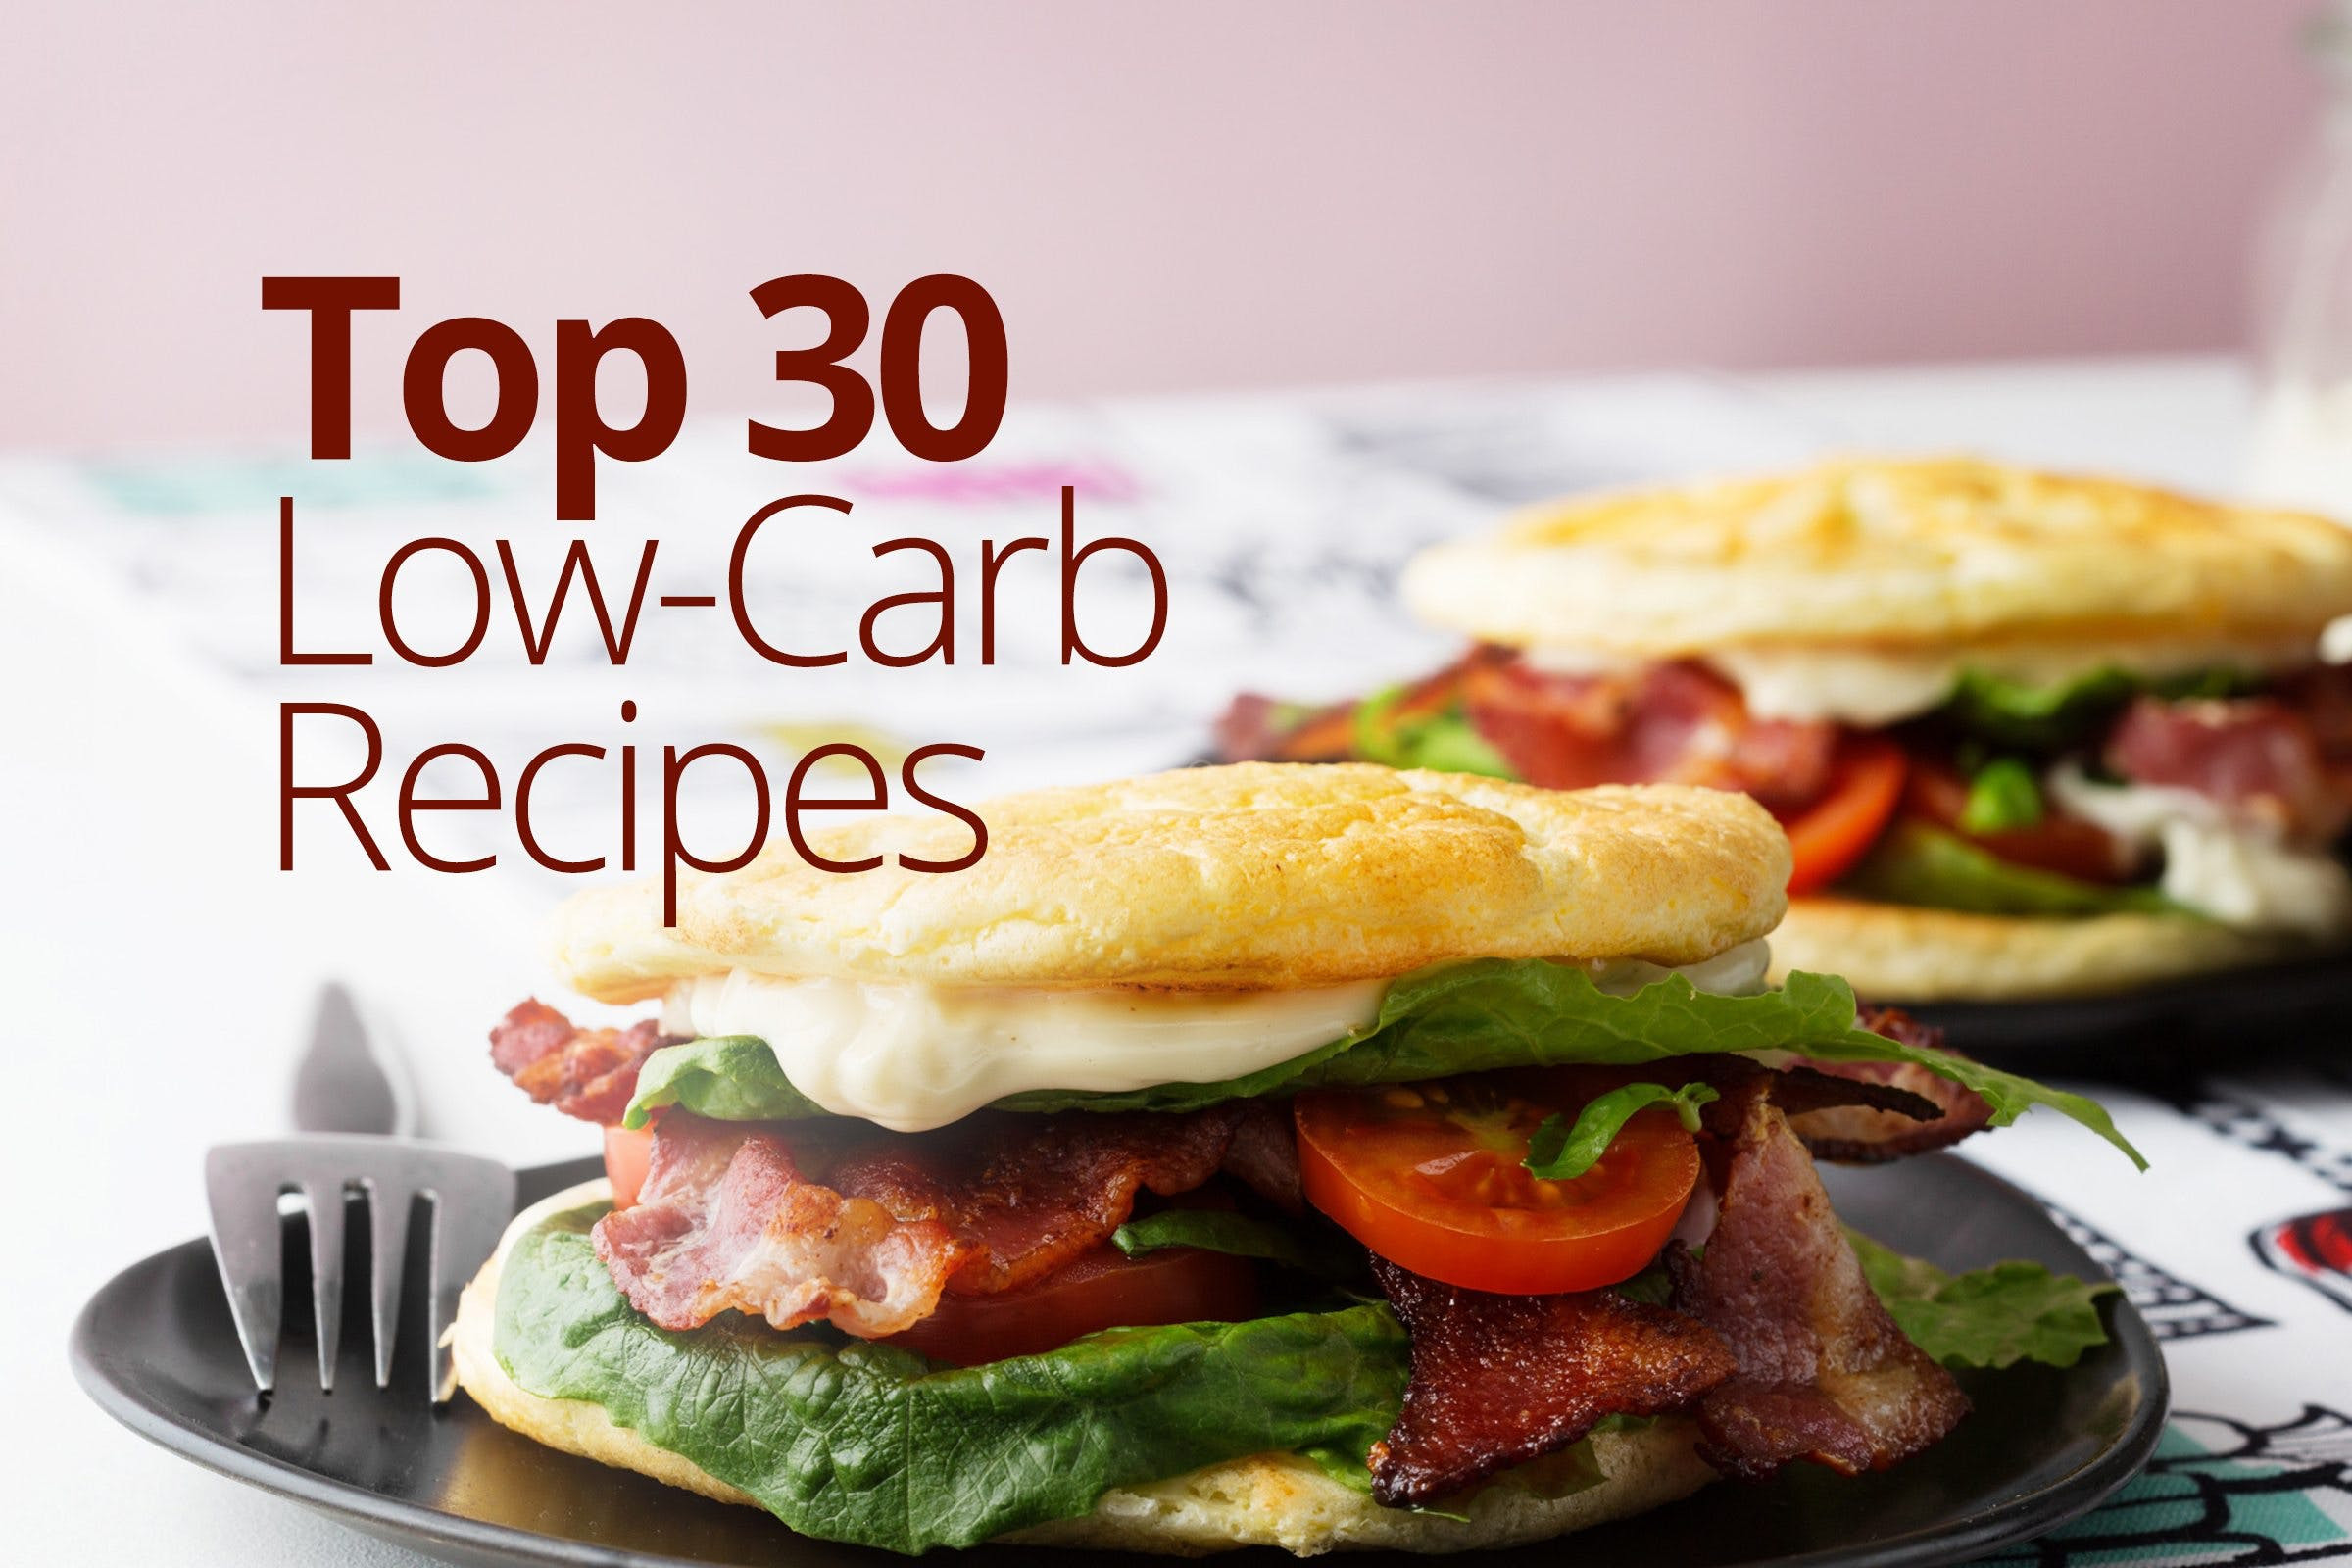 Low Carb Low Calorie Recipes Food Network
 Top 30 Low Carb Recipes Simple & Delicious Inspiration